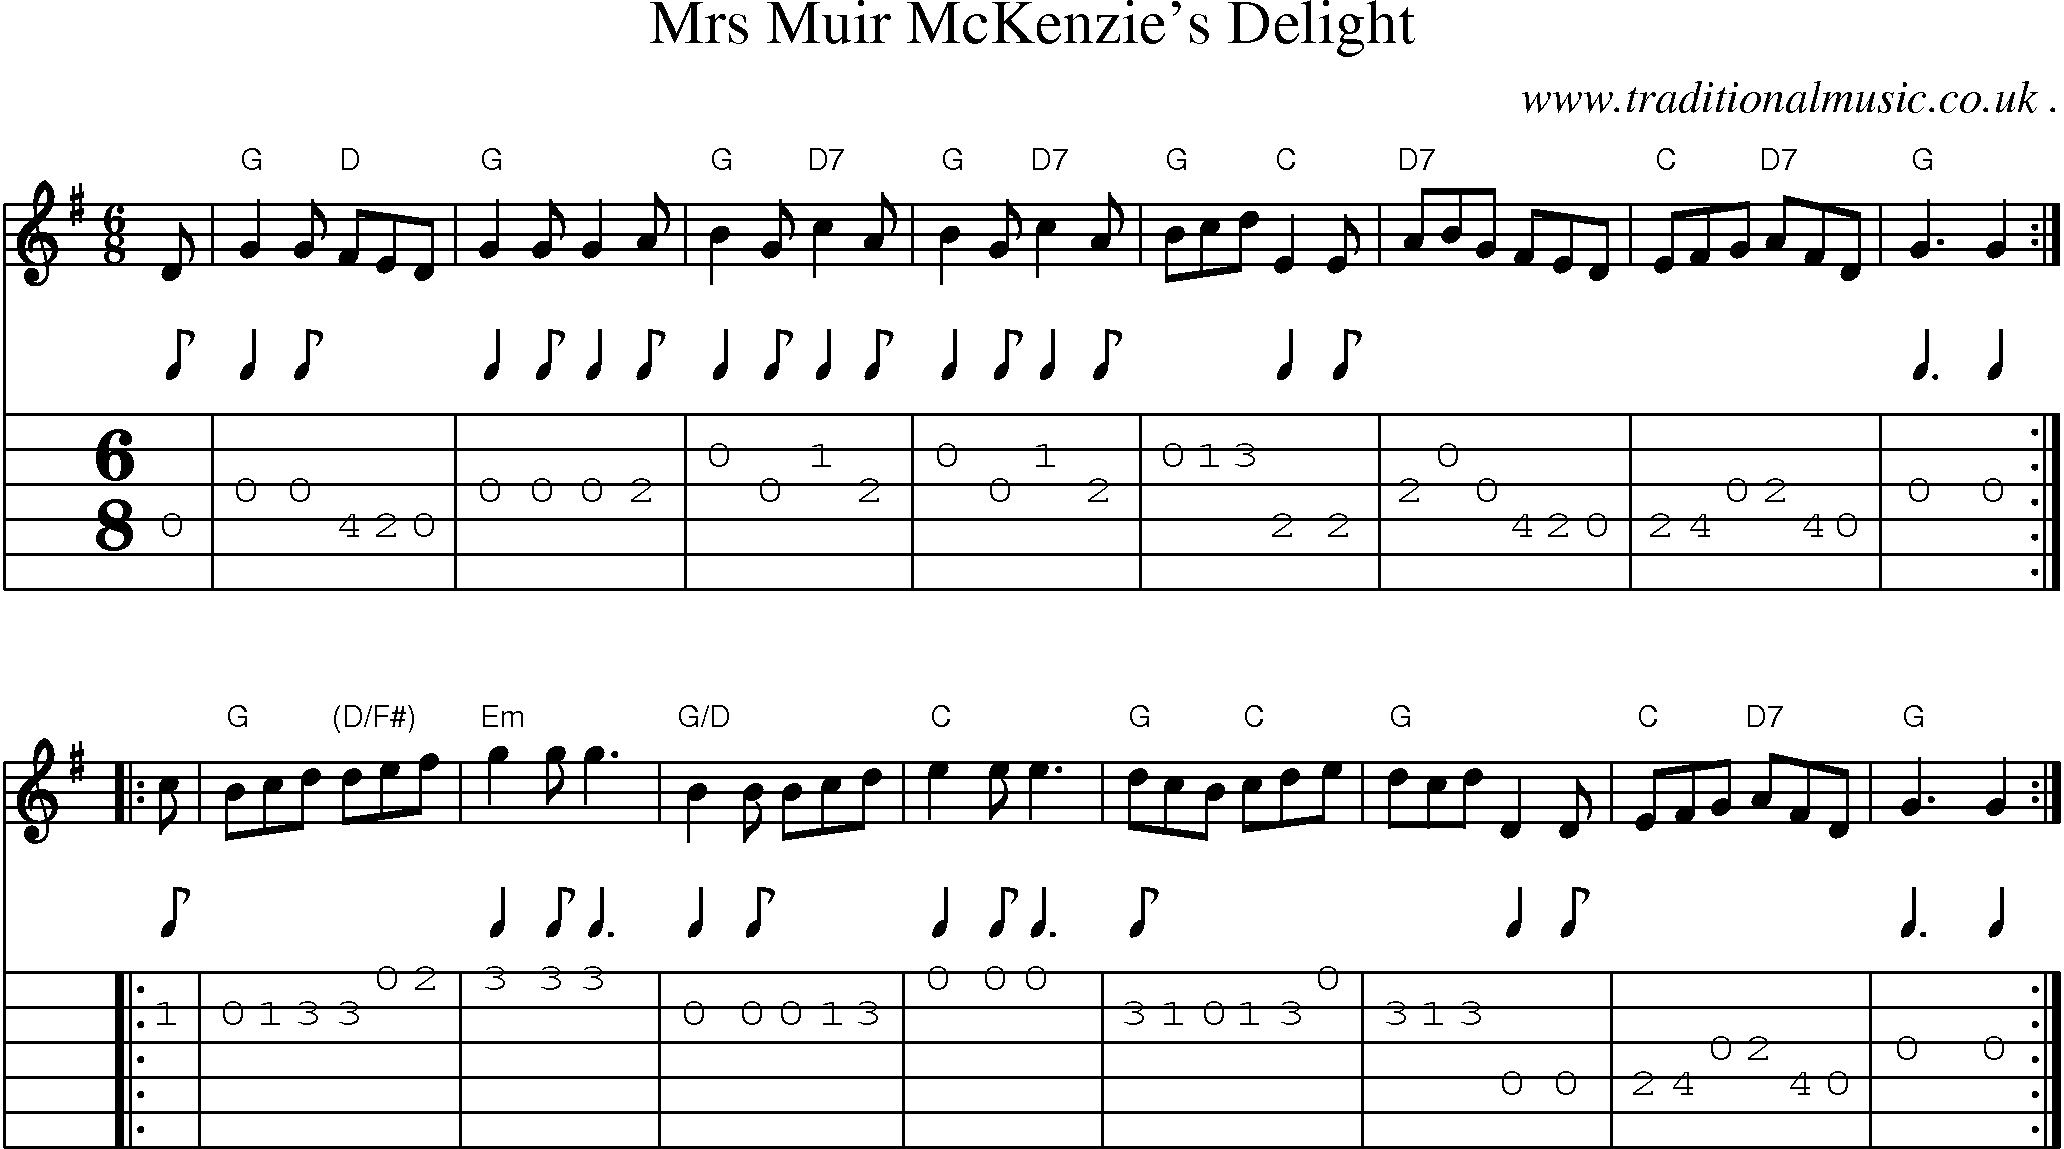 Sheet-music  score, Chords and Guitar Tabs for Mrs Muir Mckenzies Delight